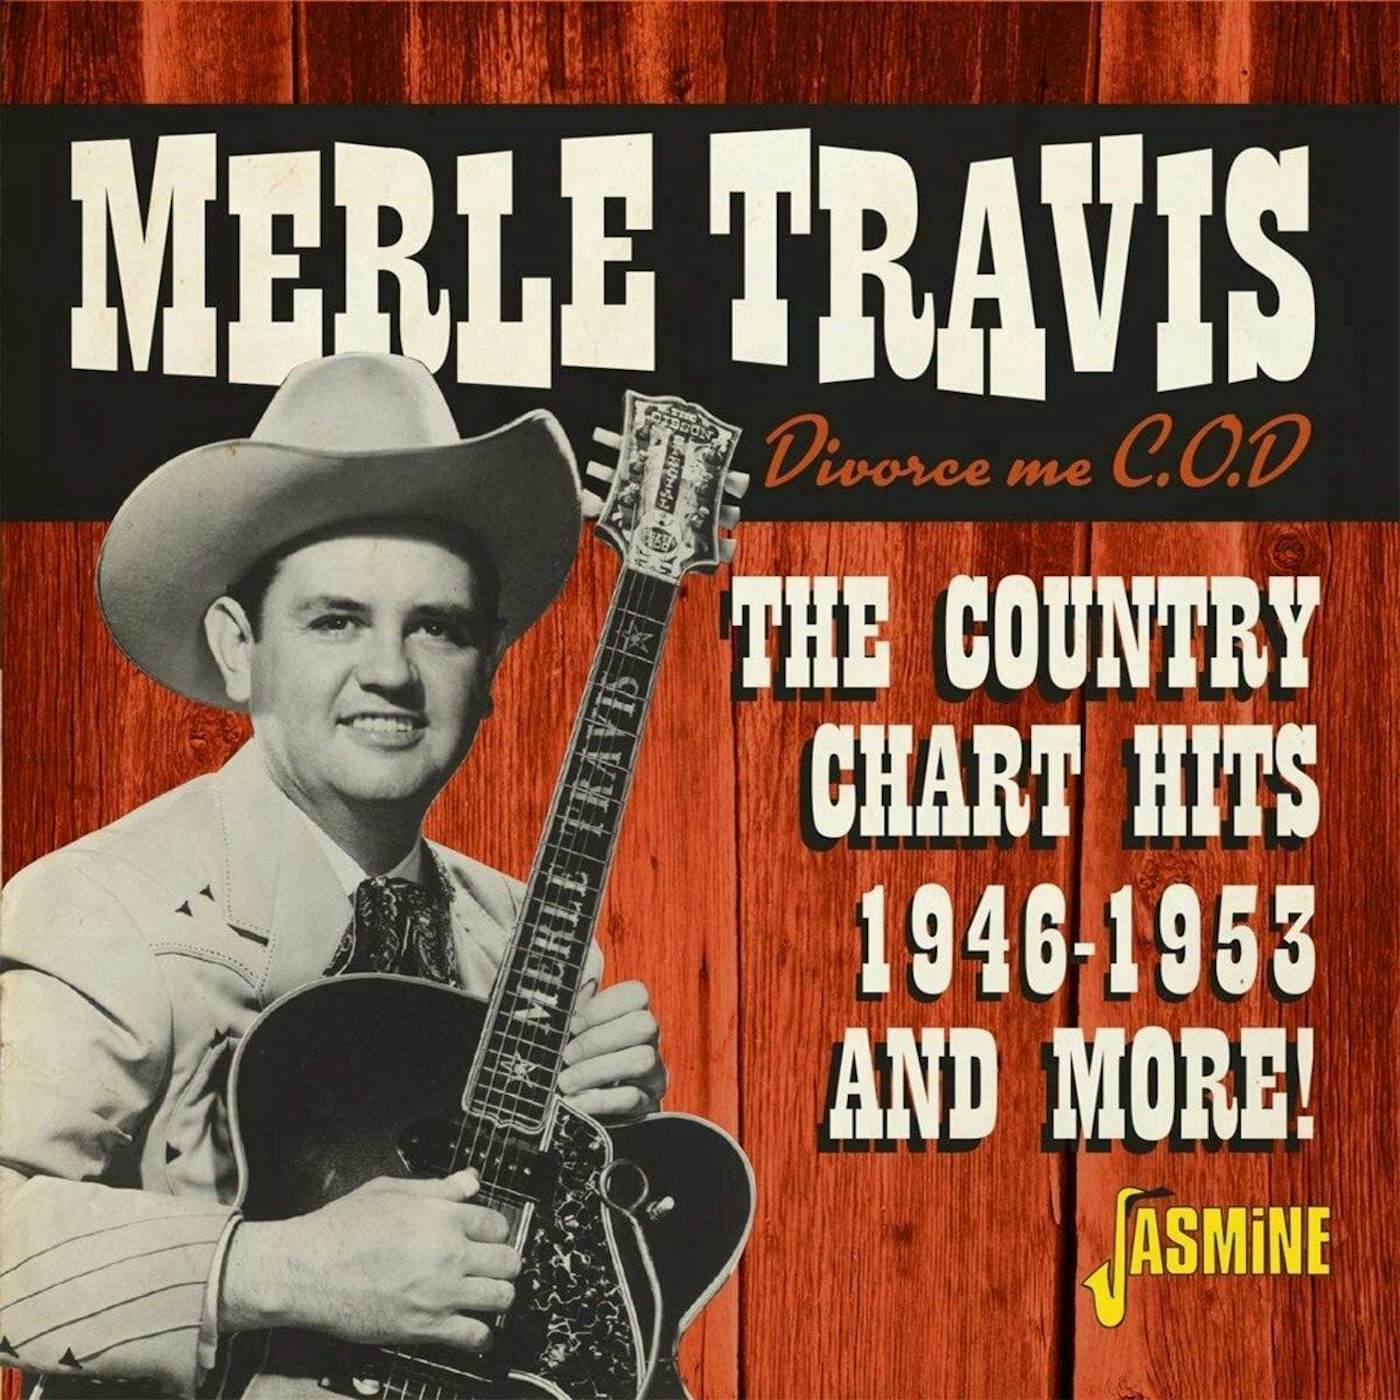 Merle Travis DIVORCE ME C.O.D. THE COUNTRY CHART HITS 1946-1953 CD